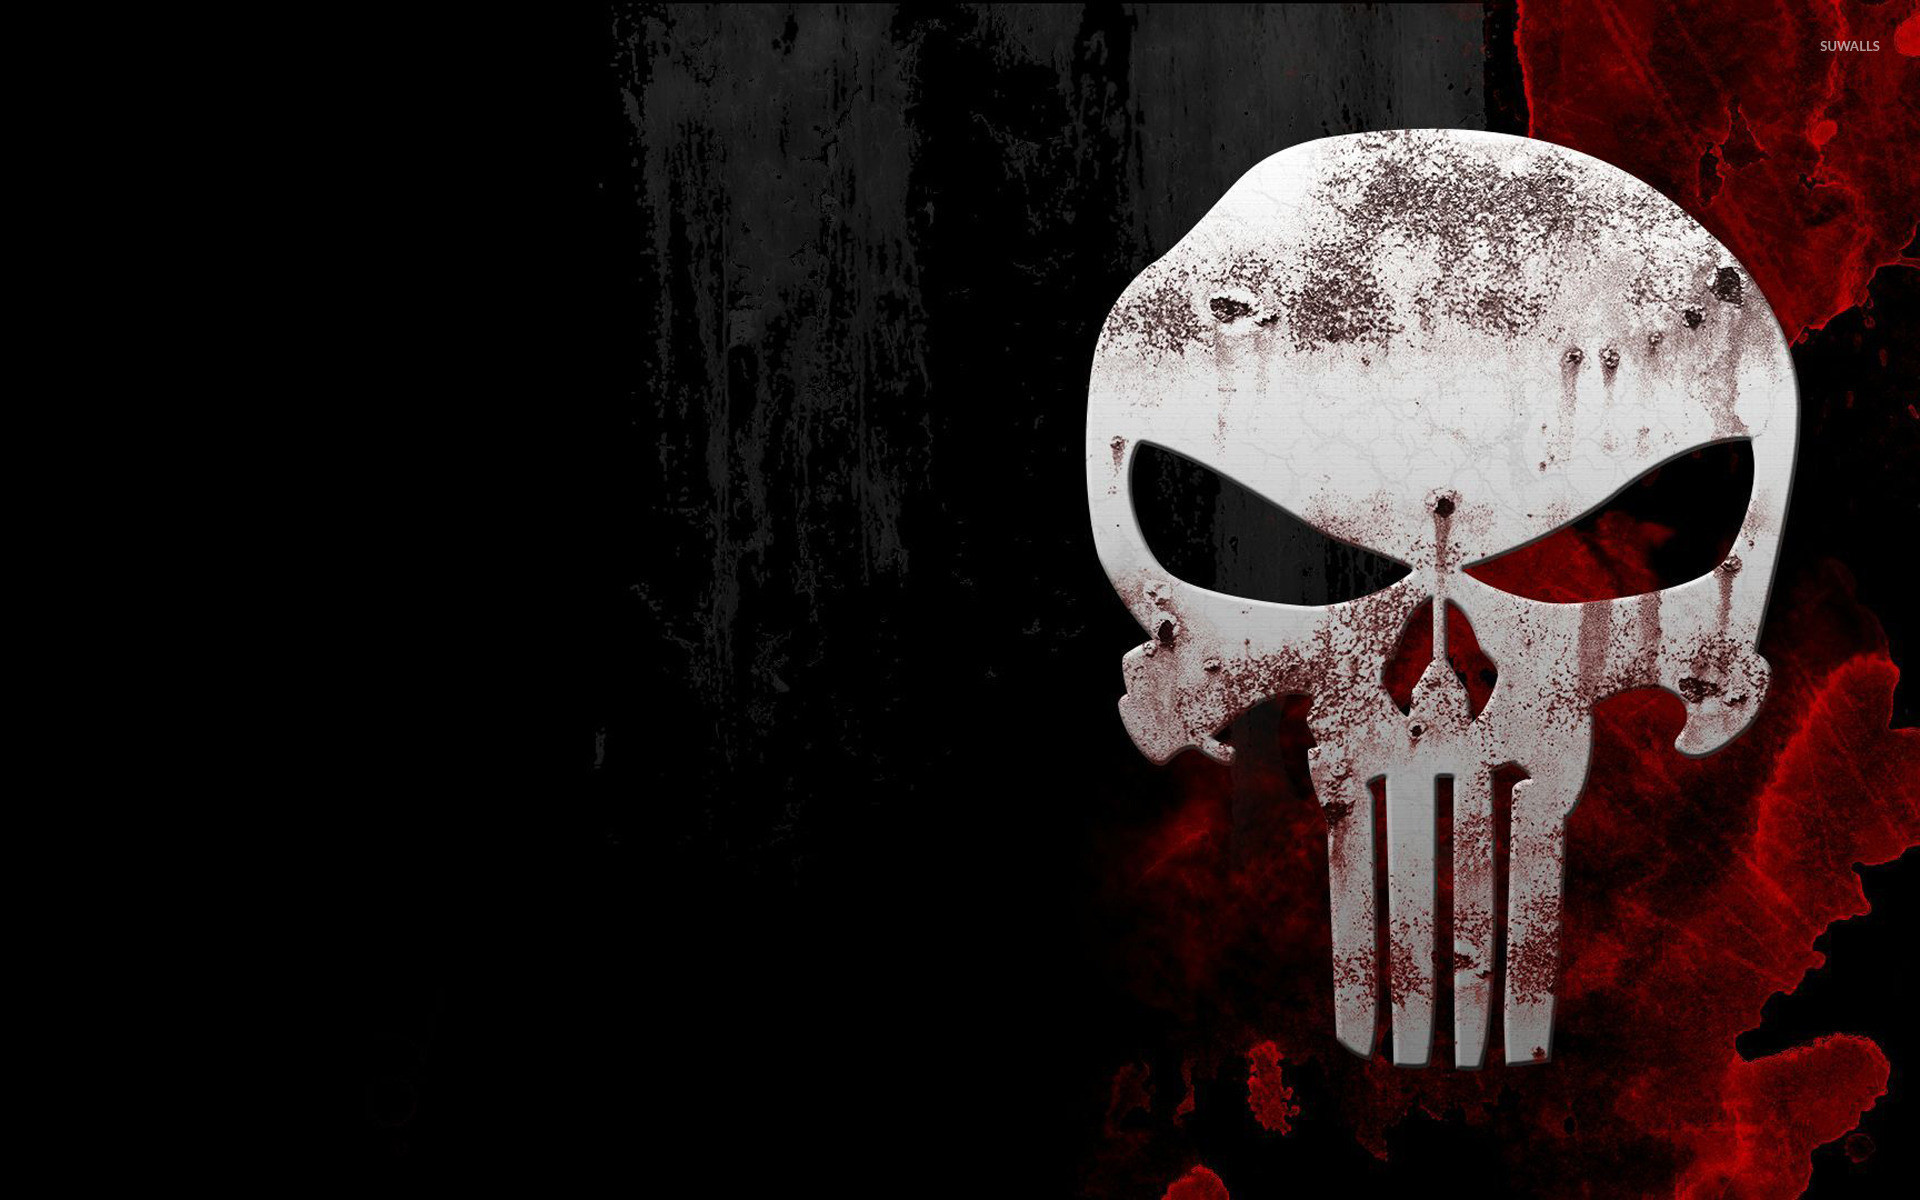 1920x1200 1920x1536 black, poster, mobile, evil, zombie,hd abstract wallpapers,  heavy, horror dark, skull, tablet backgrounds, vector, metal,death,  artworks Wallpaper ...